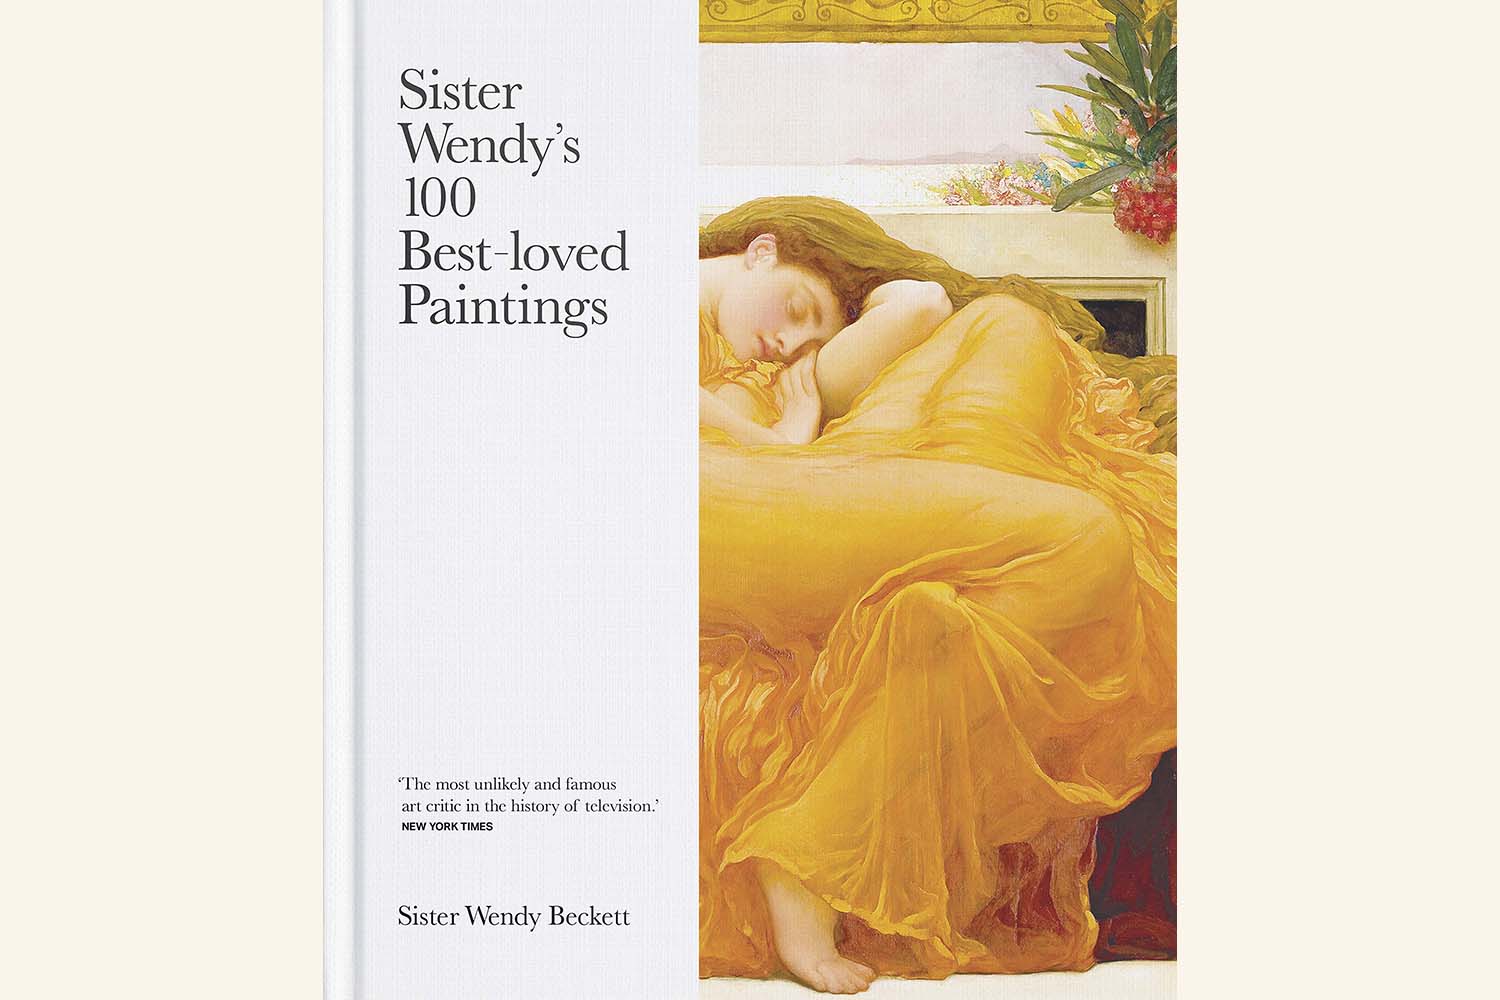 The Best Art History Books Every Art Lover Should Read: 100 Most Popular Paintings, by Sister Wendy